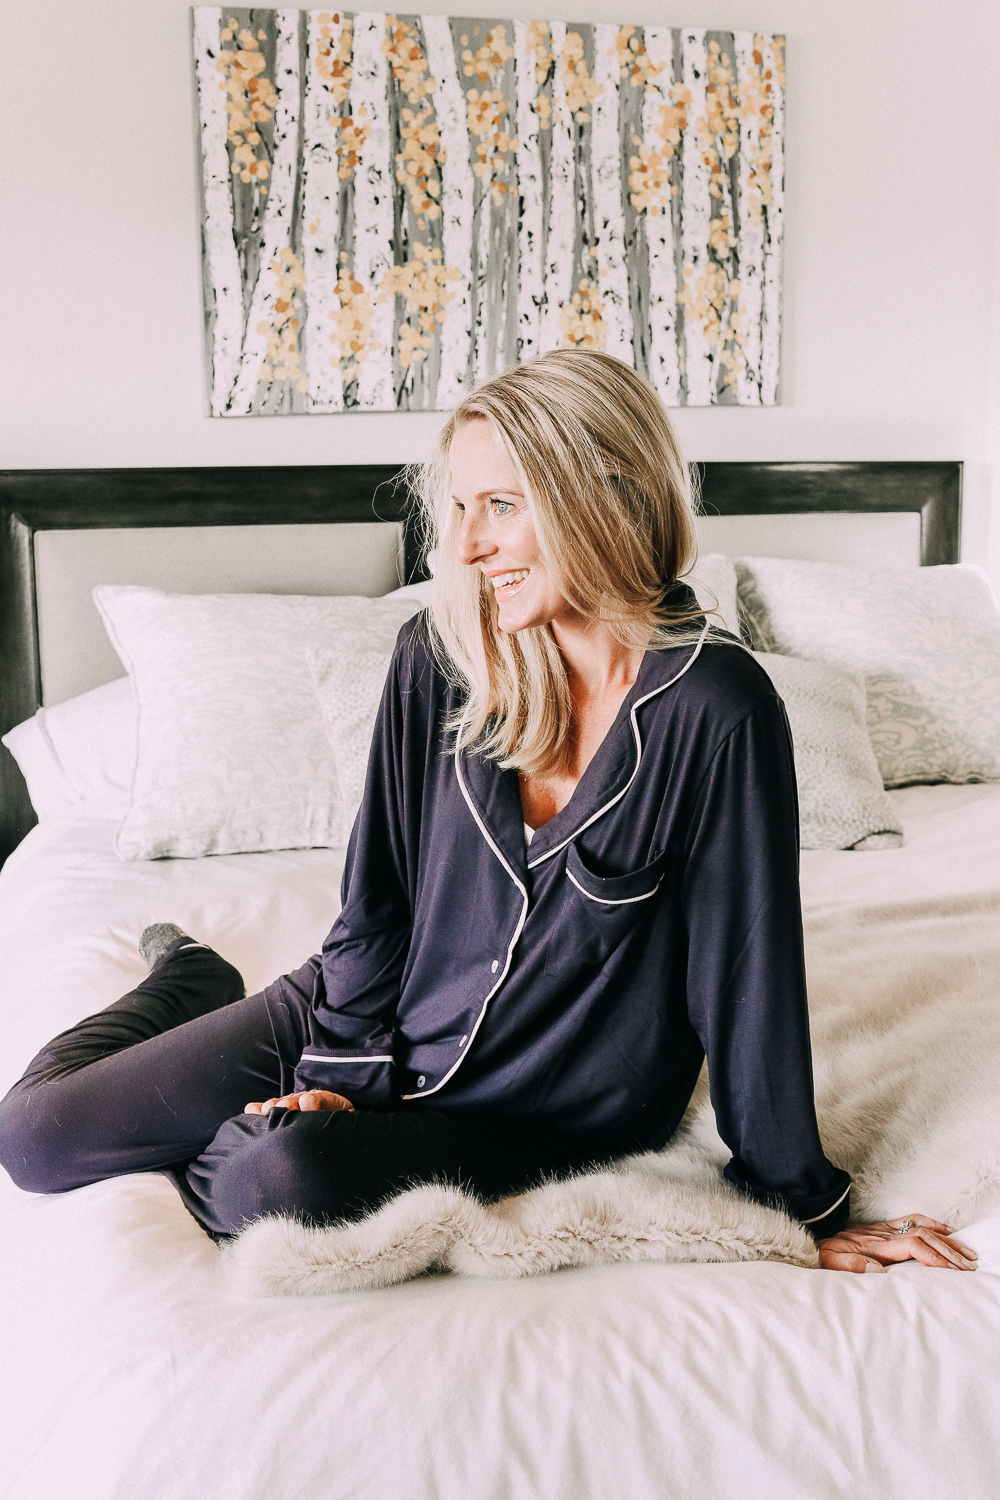 Nordstrom surprise sale featuring long sleeve pajama sets in navy with white piping on fashion blogger over 40 Erin Busbee of Busbee Style